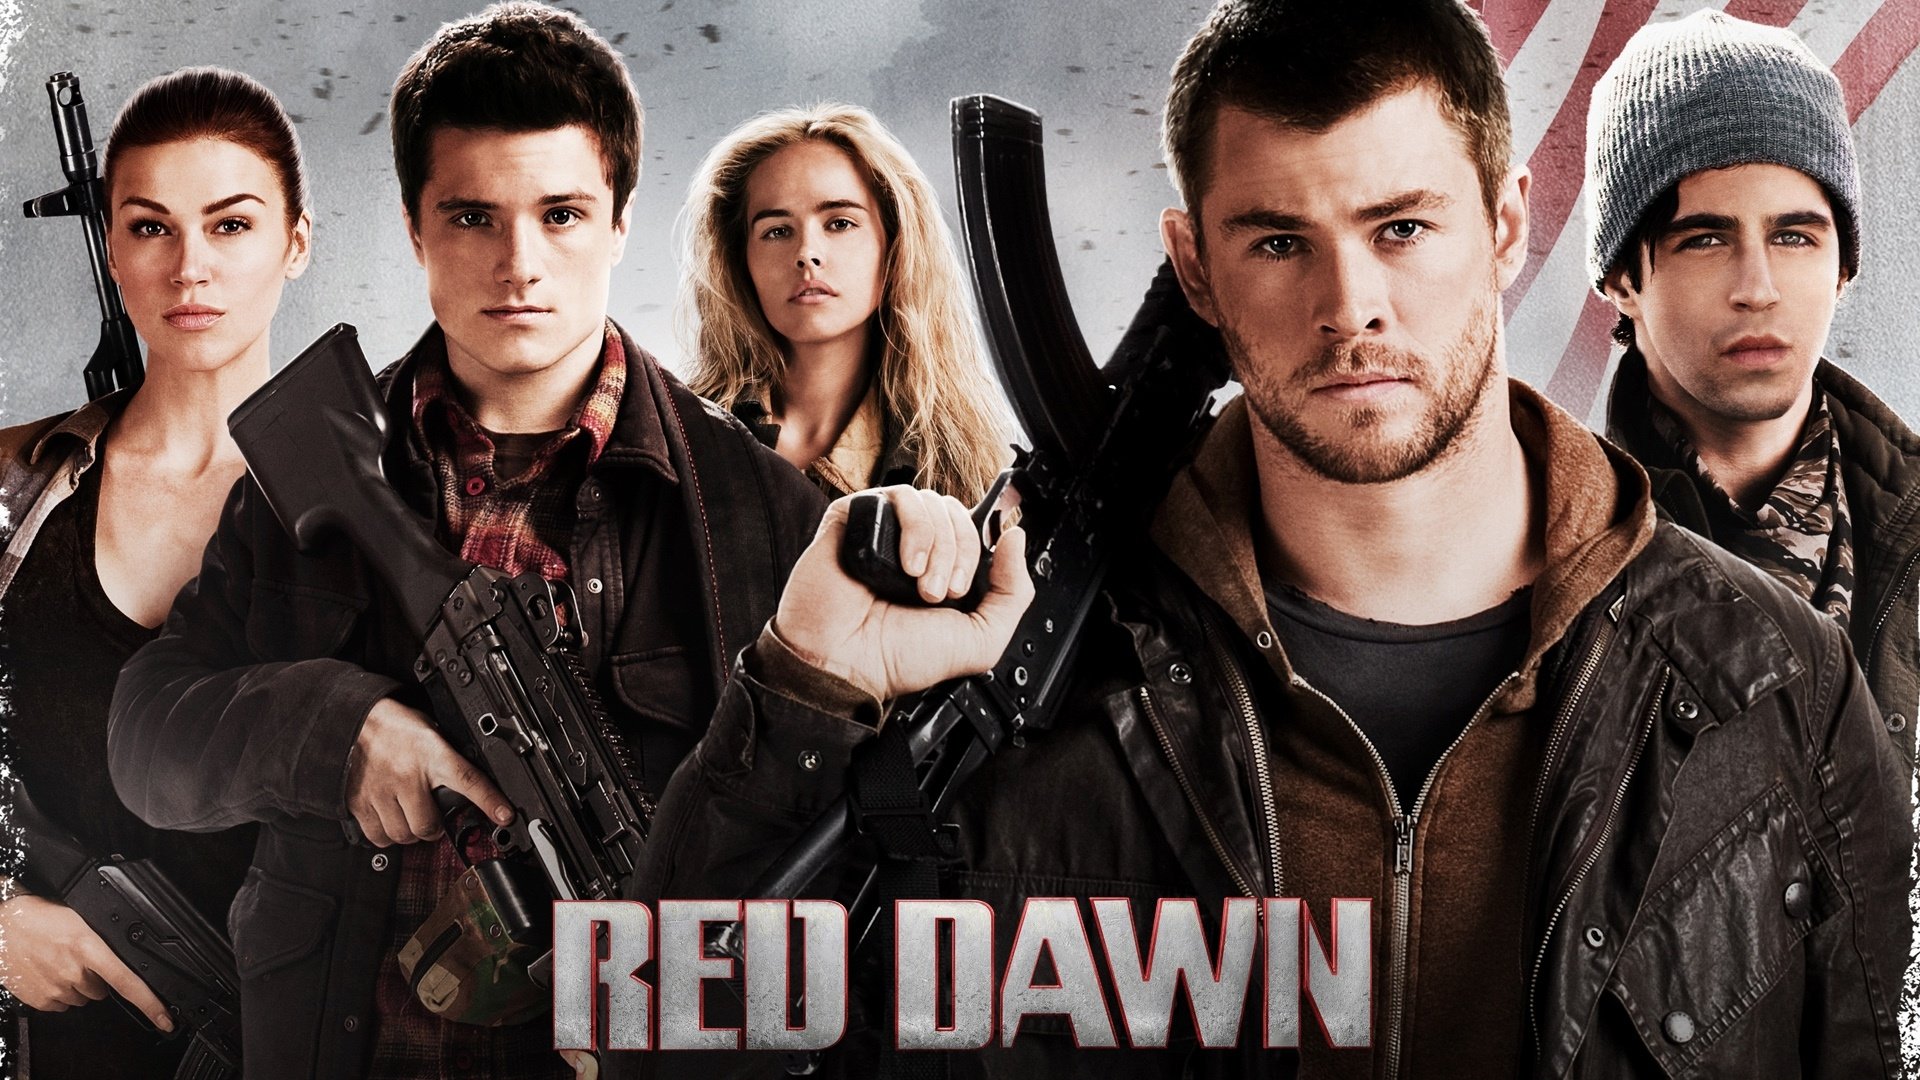 What the cult classic 'Red Dawn' teaches us about insurgent warfare